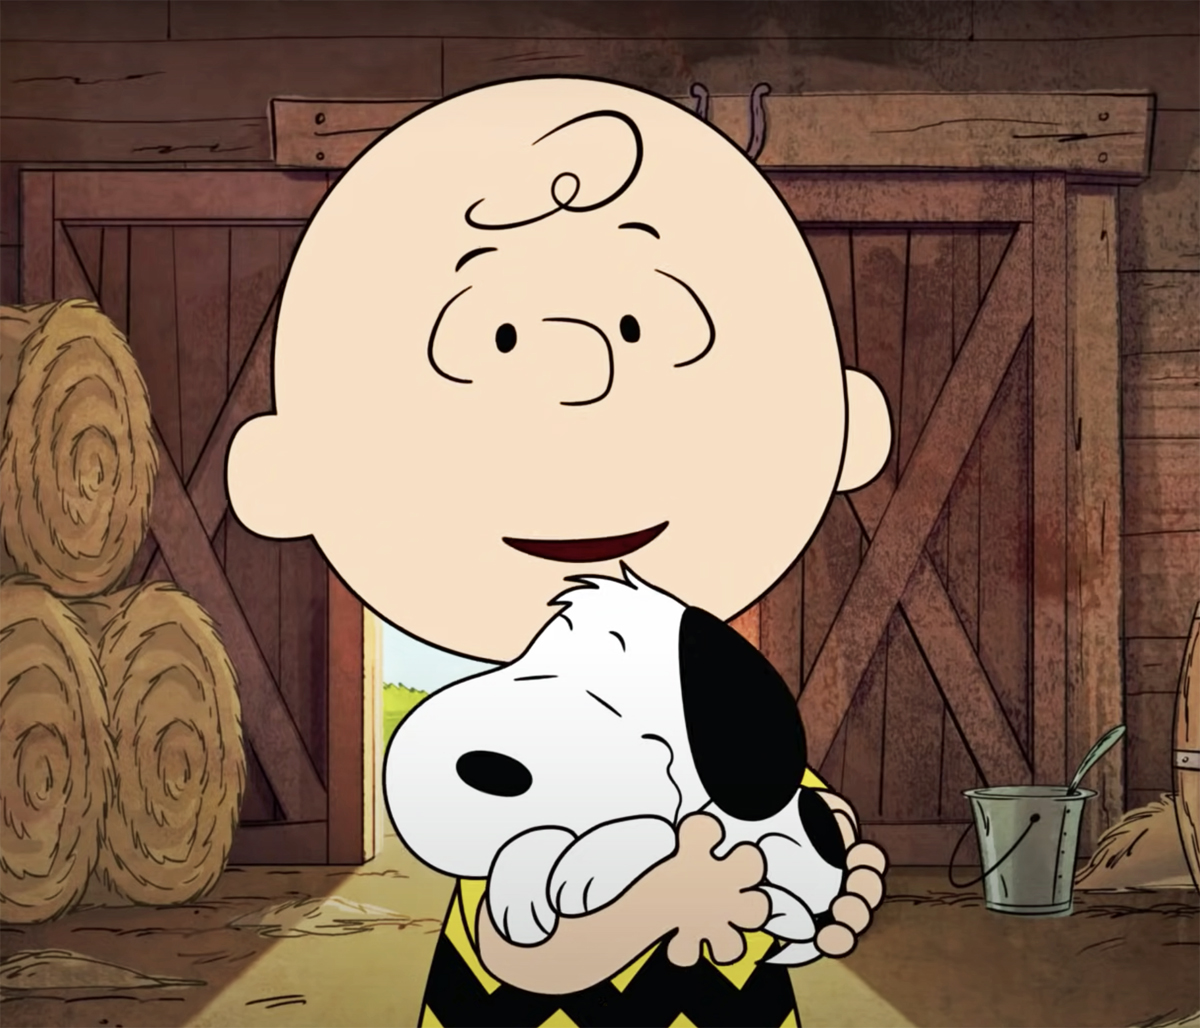 Child Voice Actor Behind Charlie Brown Has A Shocking Criminal Past!